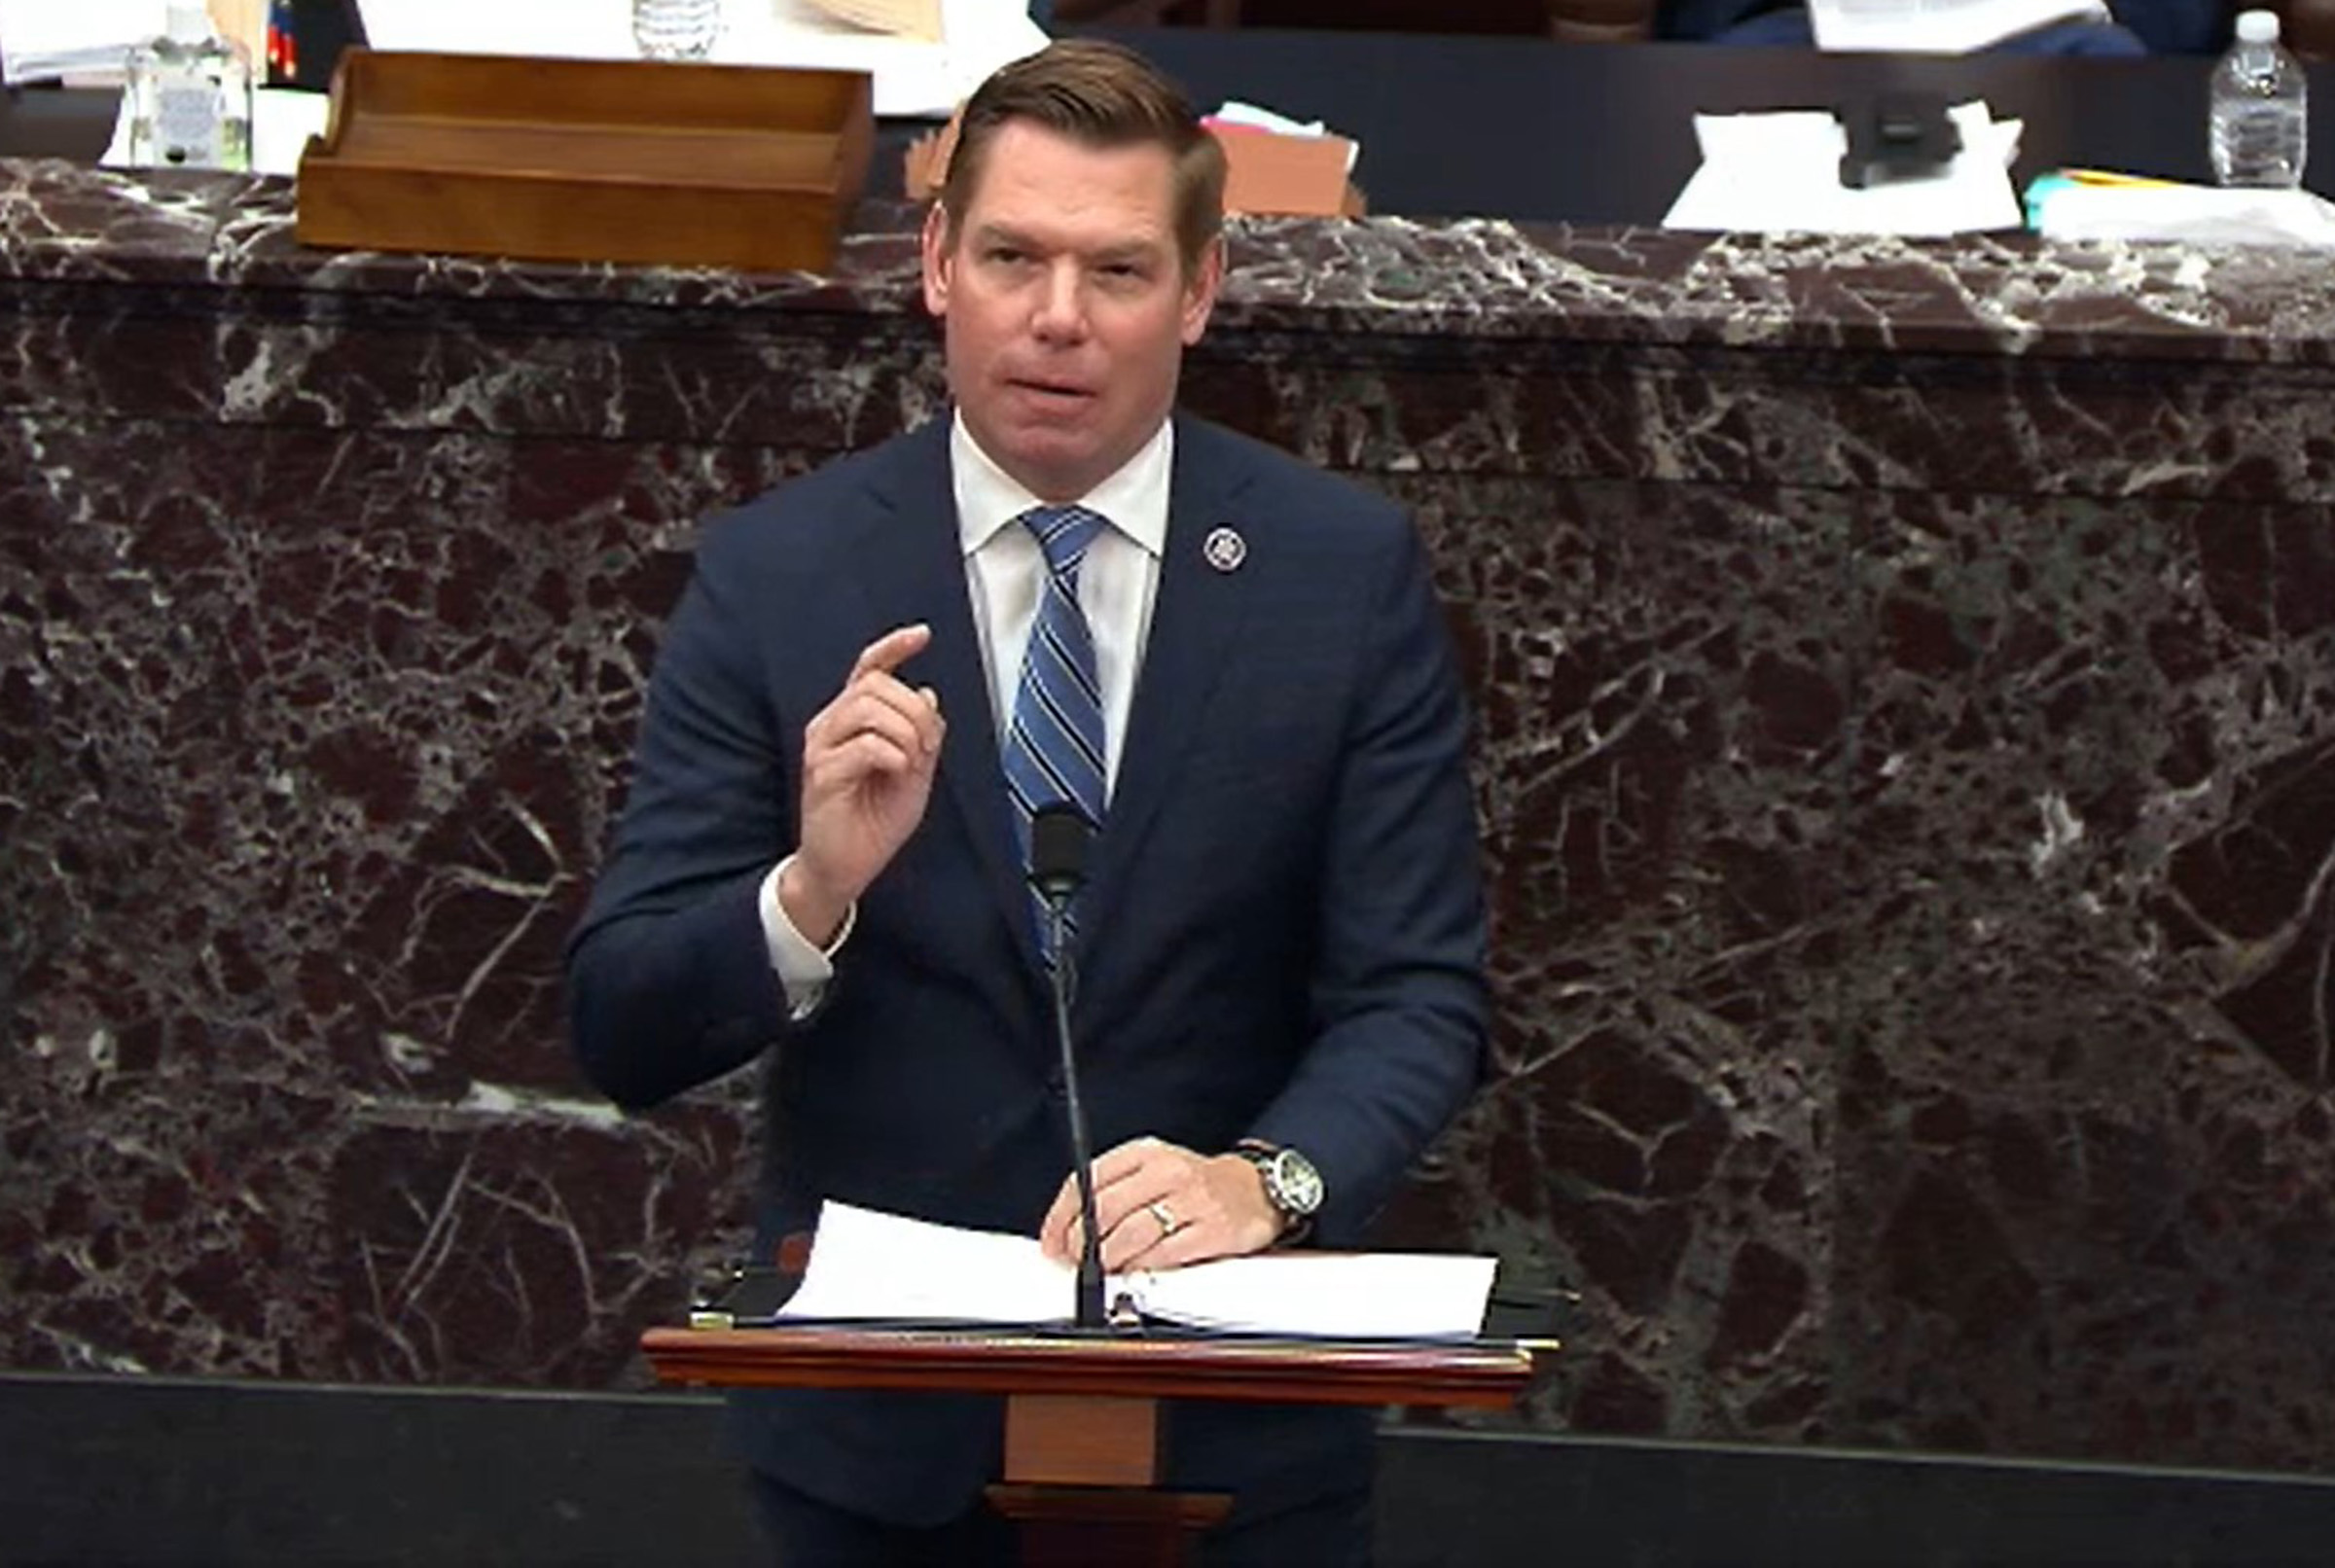 Eric Swalwell Slams Marjorie Taylor Greene for 'Stalking' AOC: 'I've Convicted People for Less'